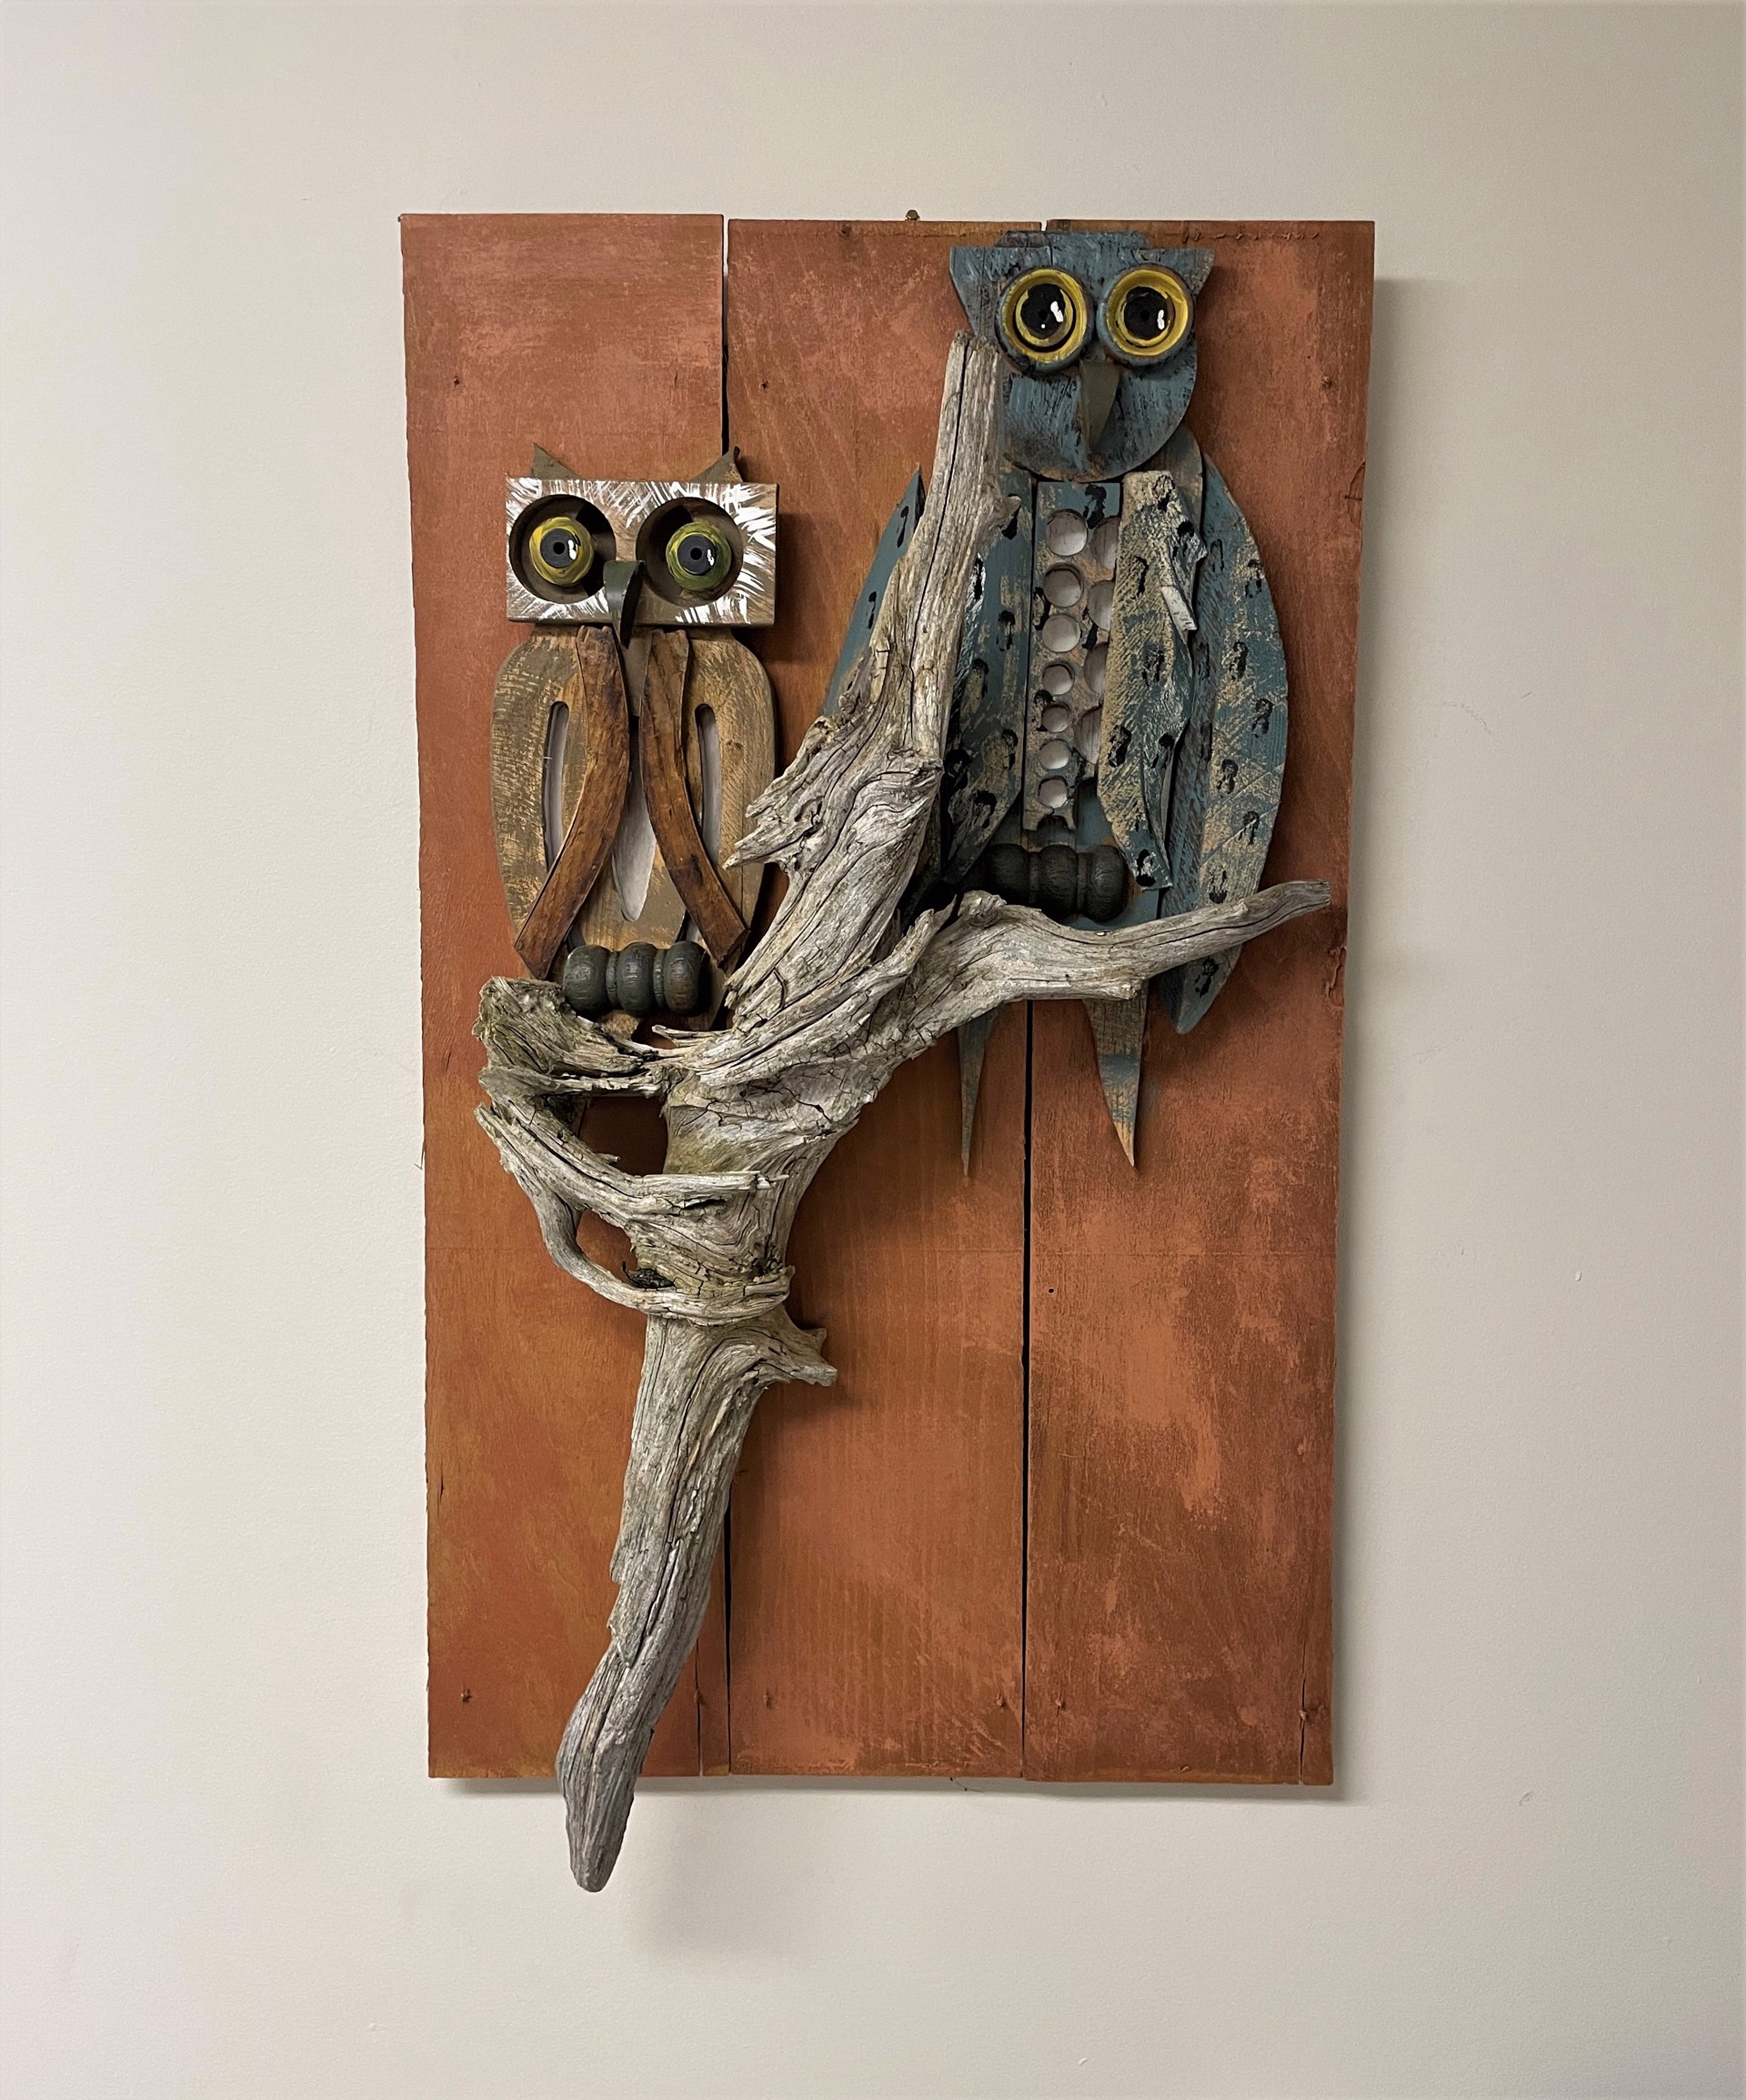 WHO GIVES A HOOT (THEY BOTH DO) by ANDRE BENOIT